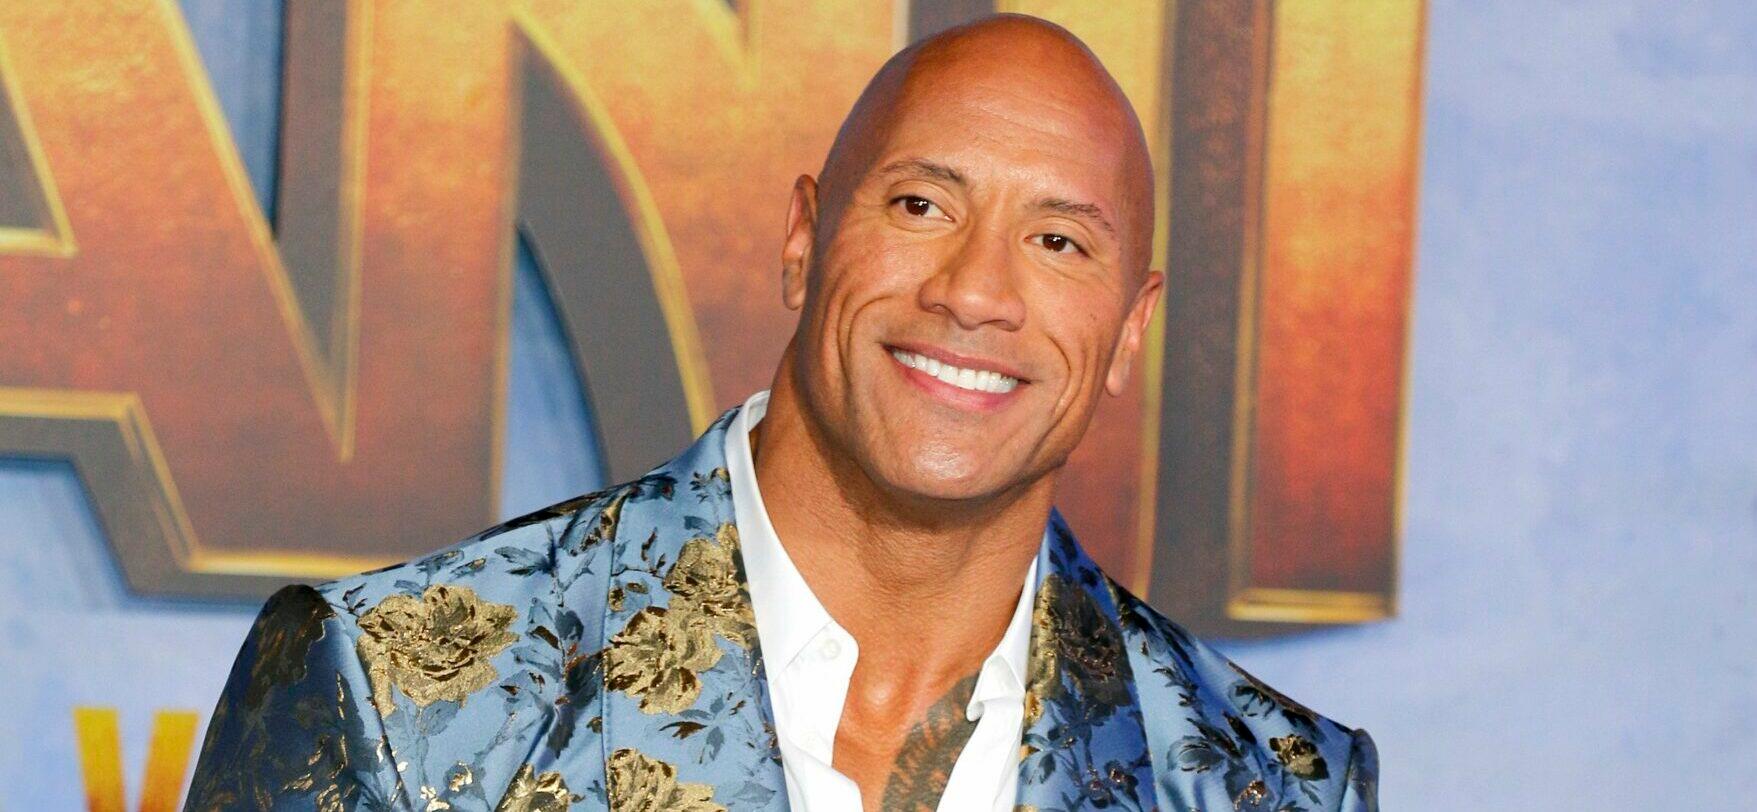 Dwayne Johnson Felt Pressured To Be Closed Off About His Feelings And Mental Health